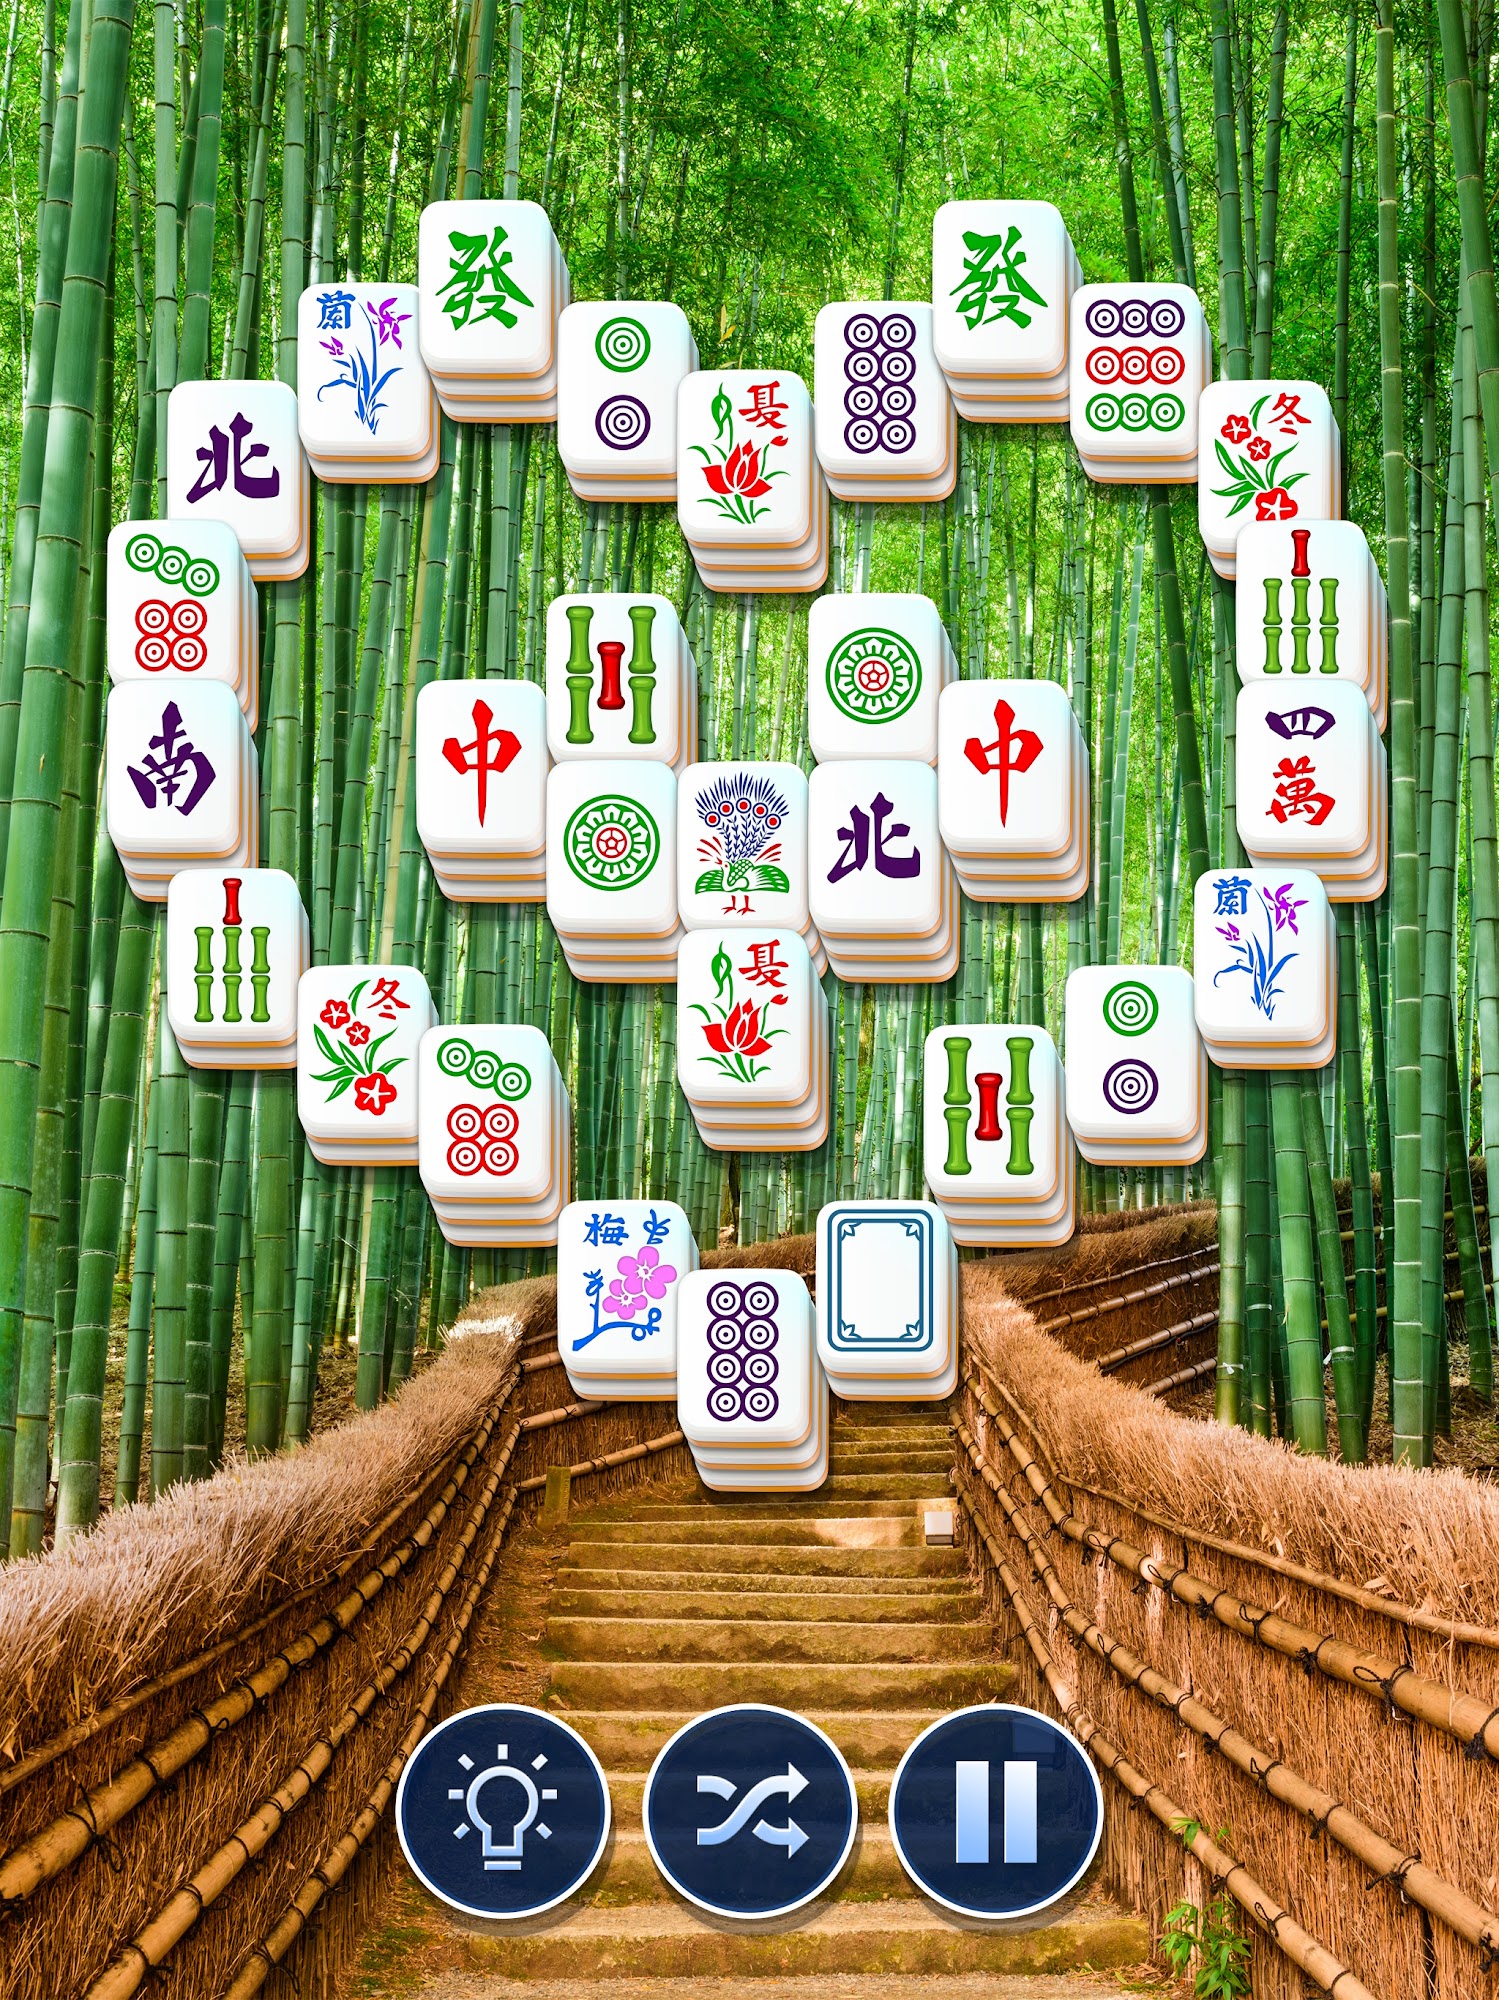 Mahjong Club - Solitaire Game